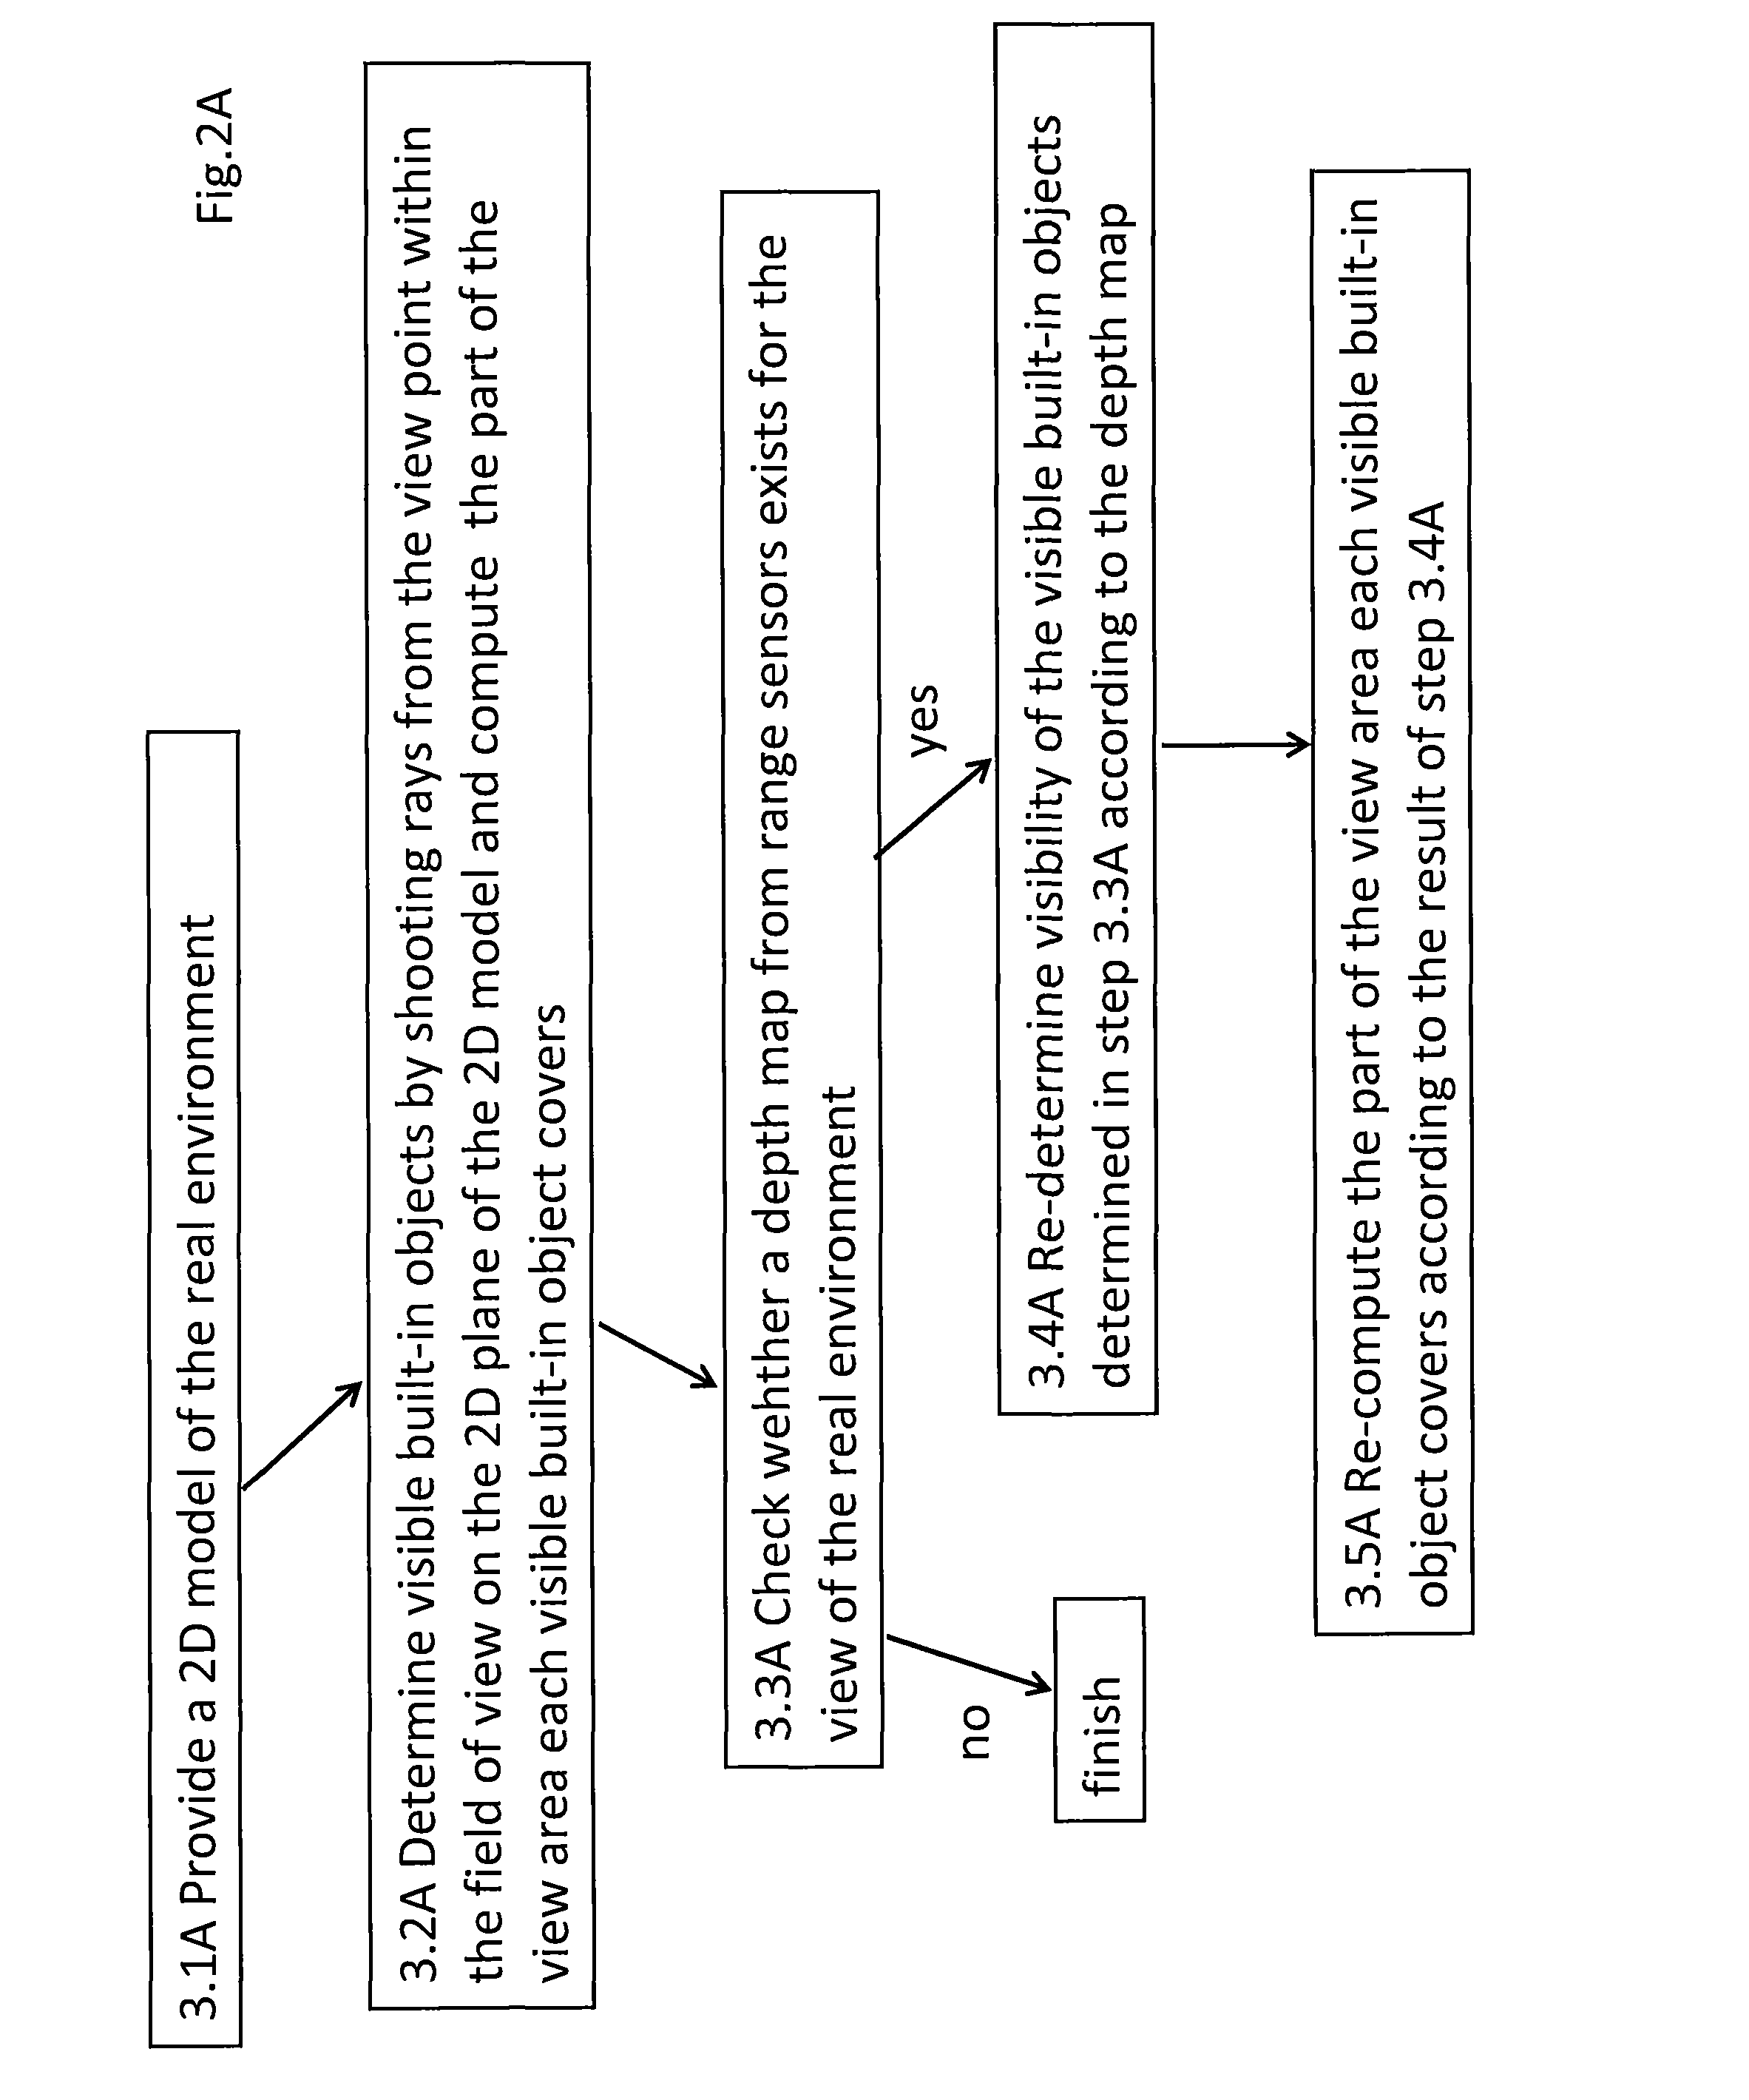 Method for Representing Virtual Information in a Real Environment